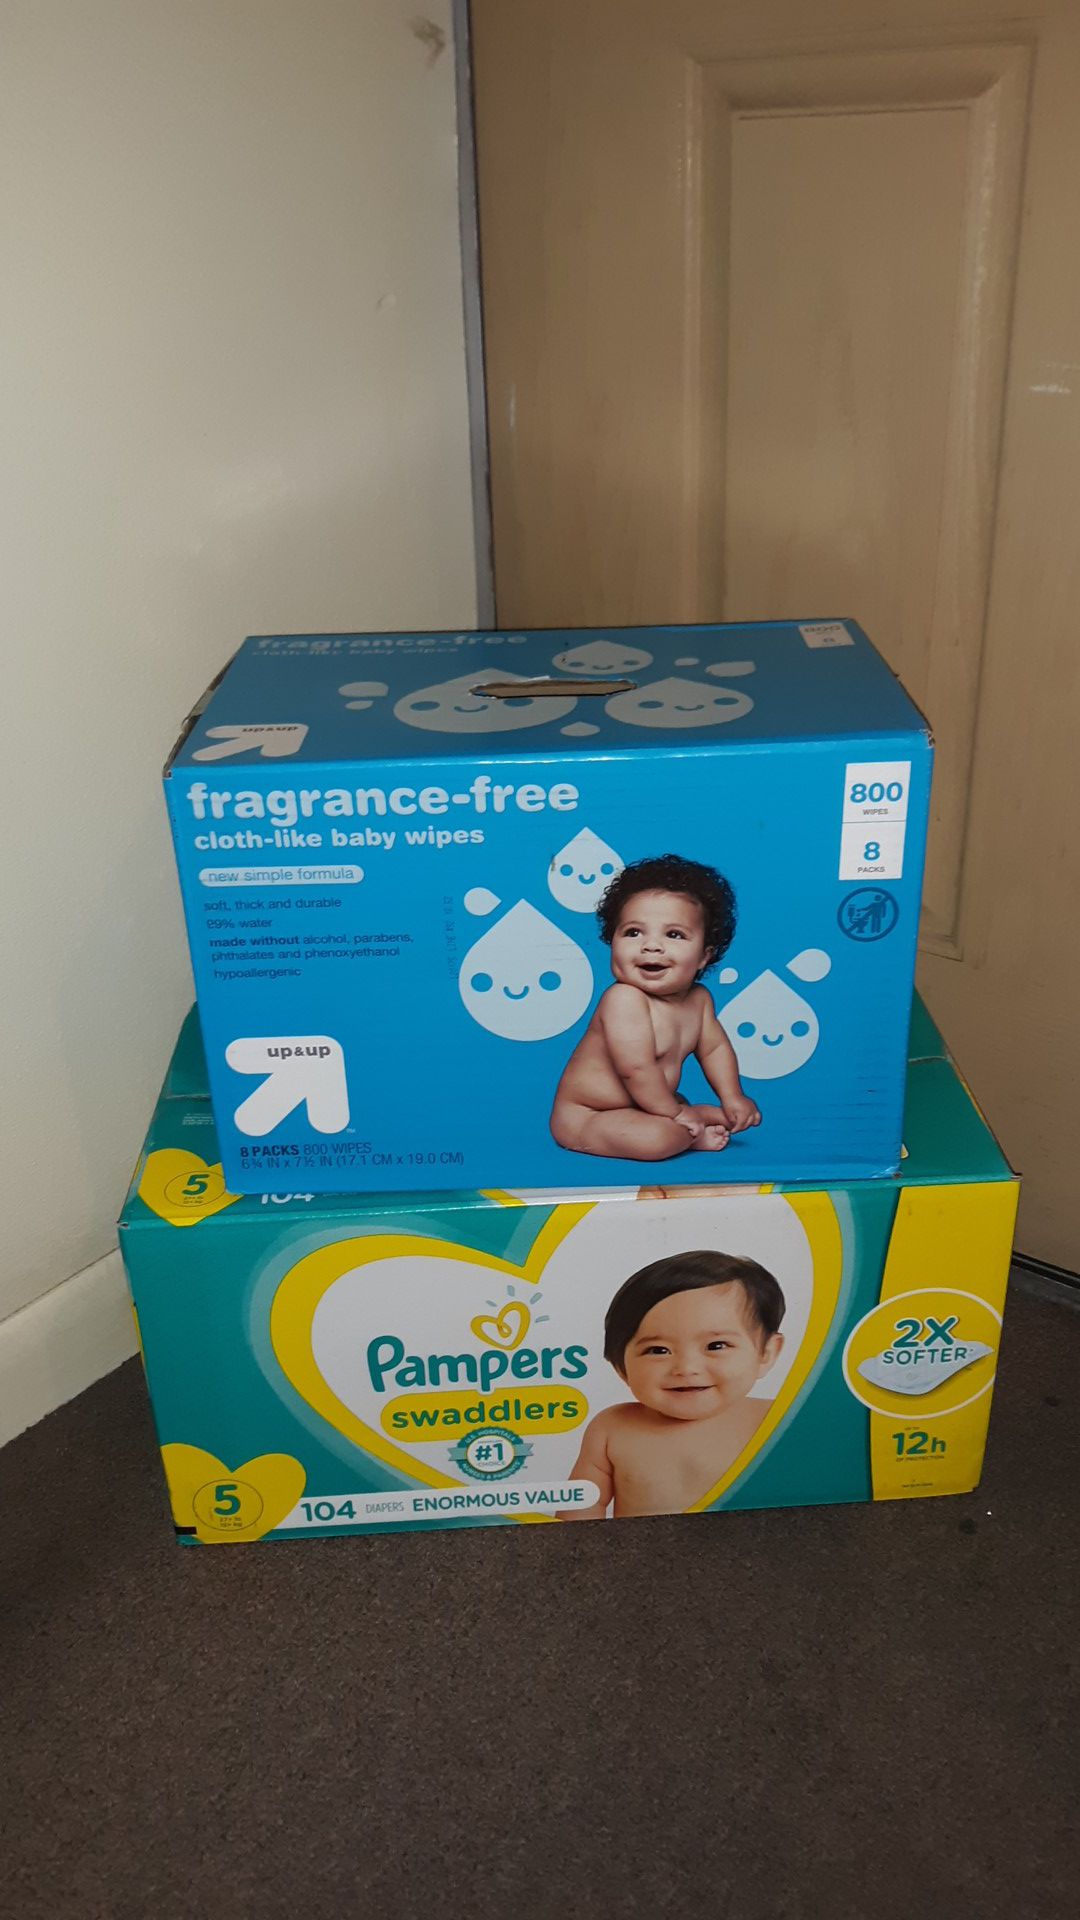 Diapers Pampers Swaddlers size 5 (104 count) and baby Wipes (800 count) other sizes available PAÑALES otros tamaños disponible